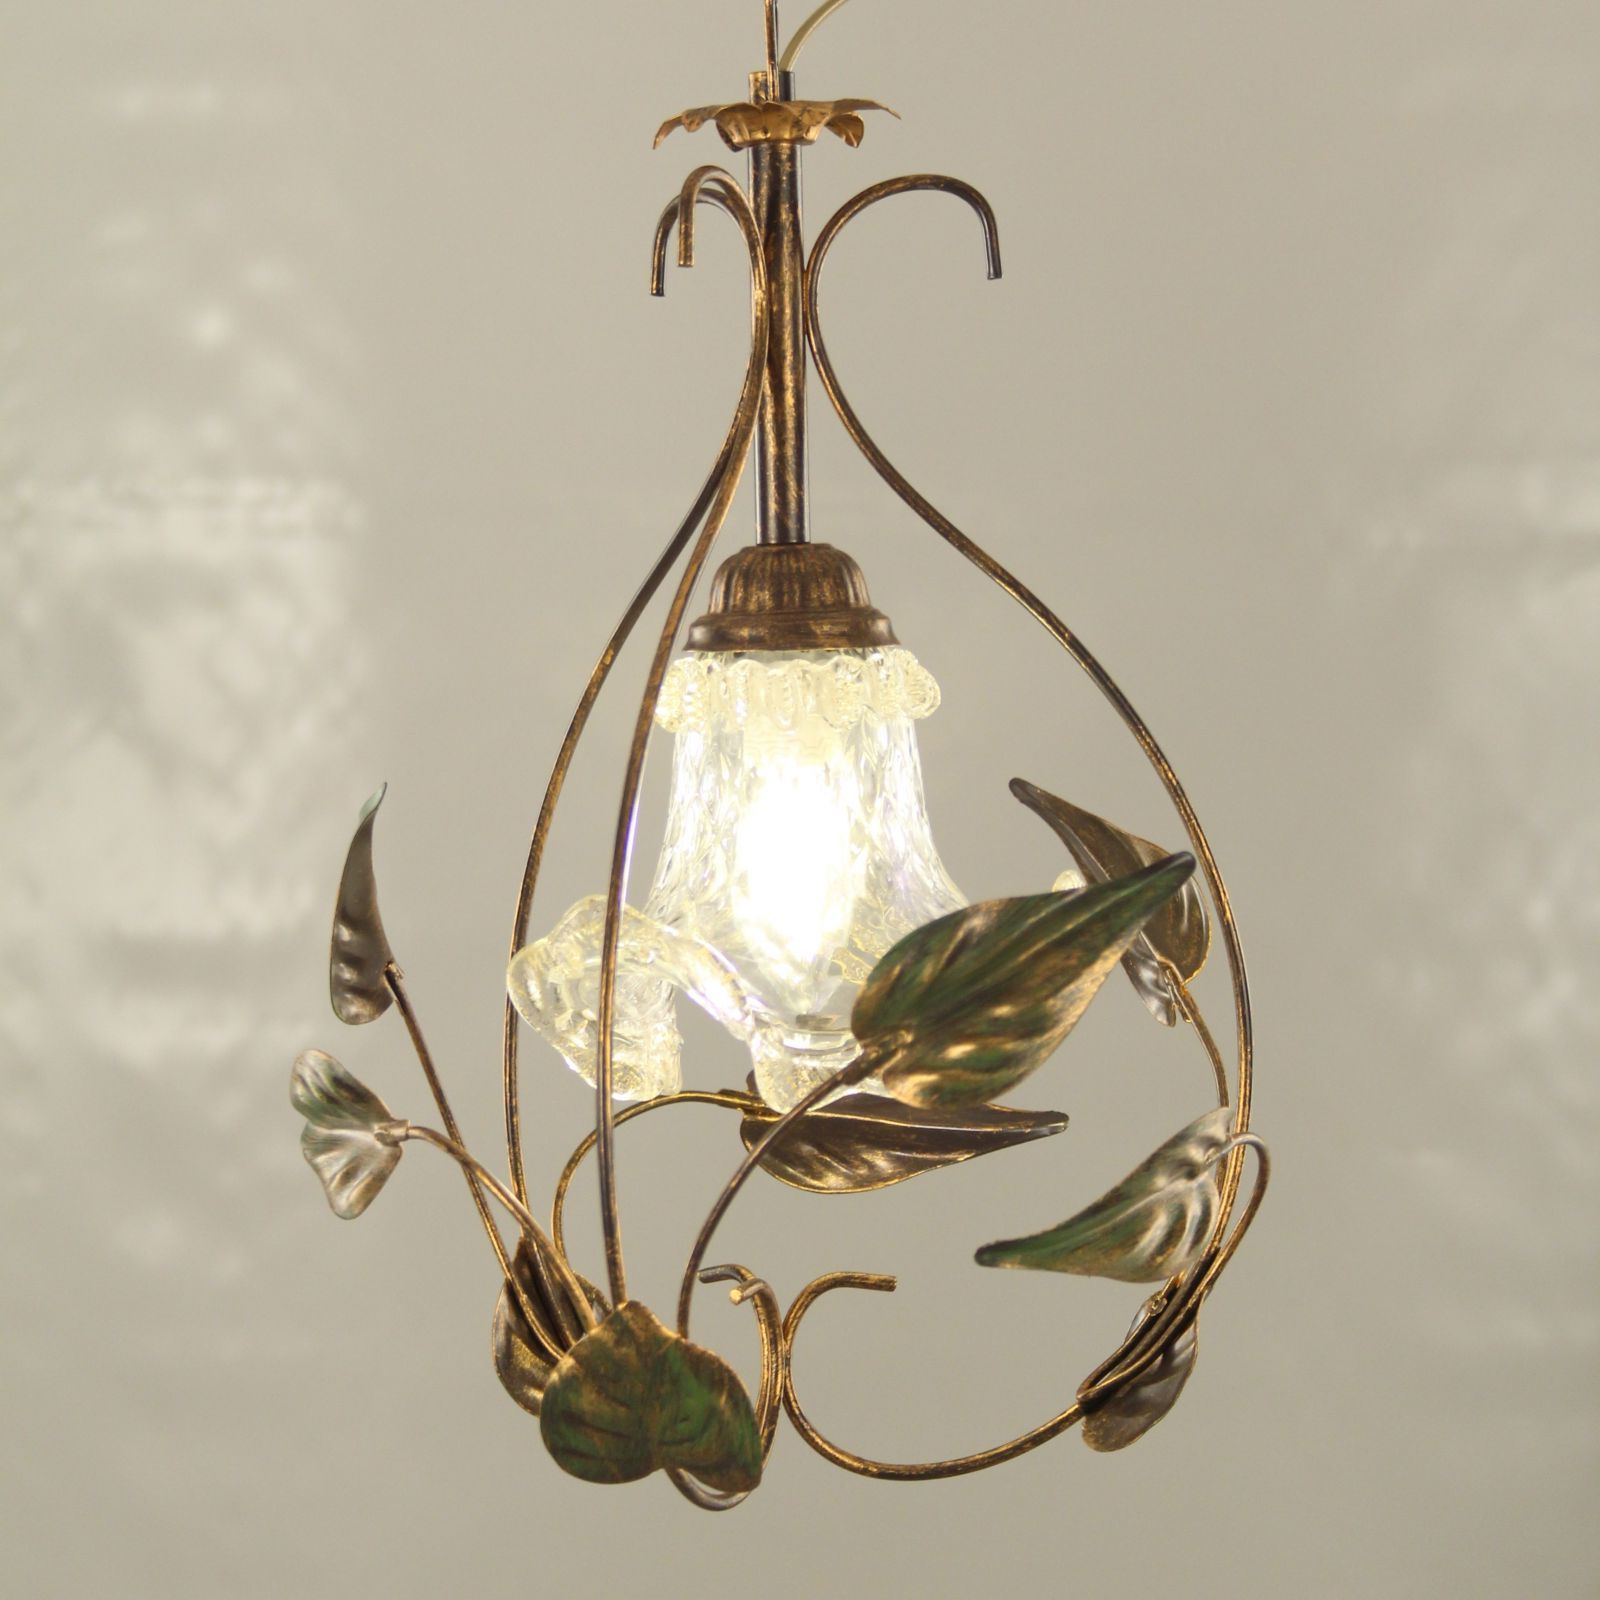 Pearl Bronze Lantern Chandeliers Intended For Most Recently Released Murano Chandelier 1 Light, Bronze Frame With Green Leaves, Gold  Brushstroke, Murano Crystal And Gold Glass Cups (View 10 of 15)